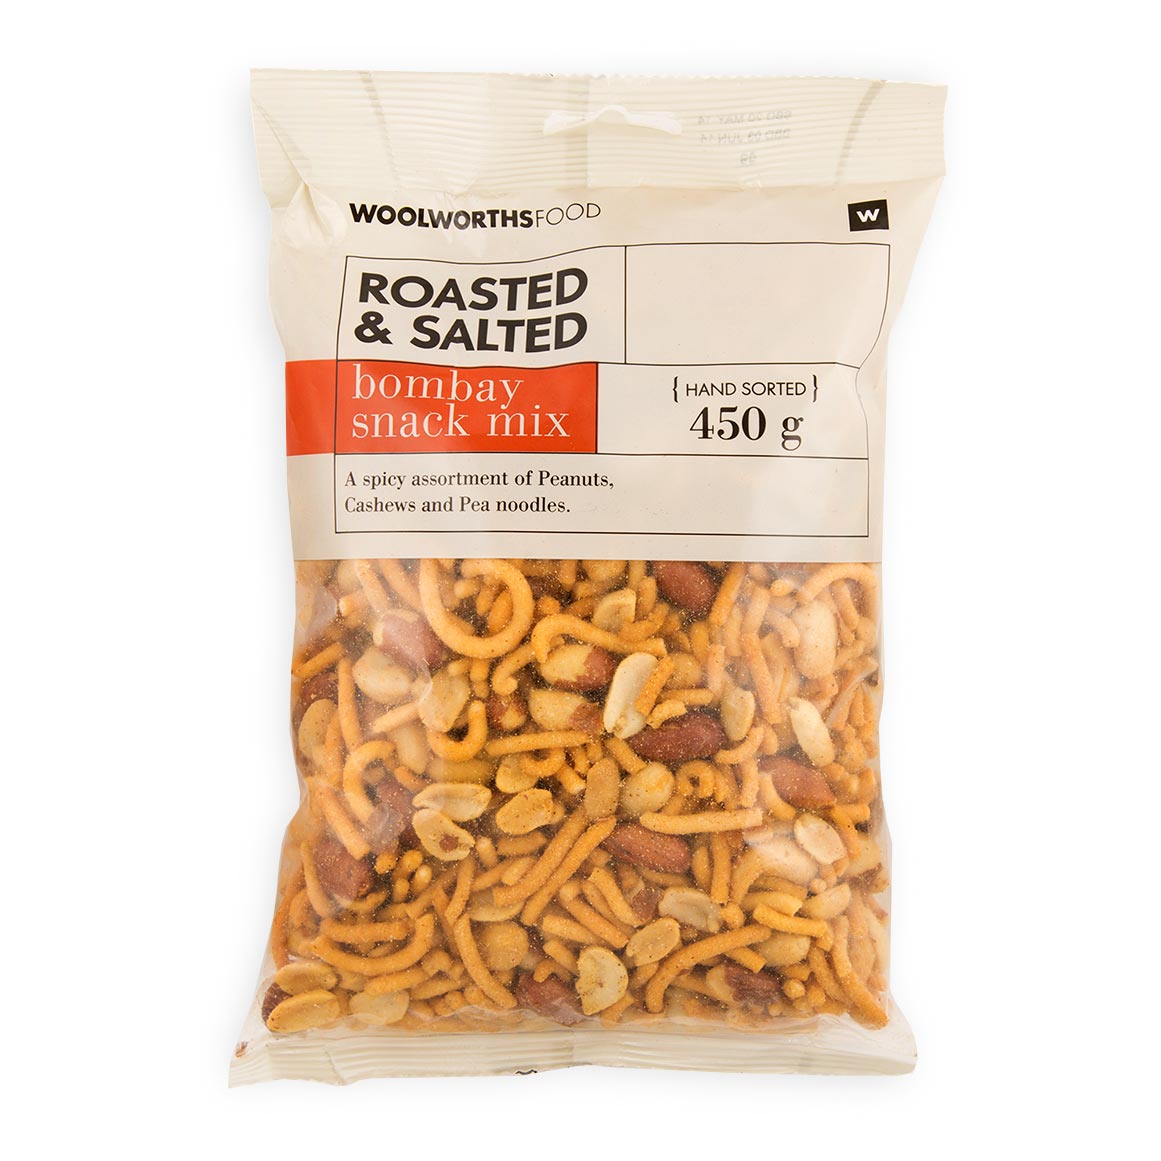 Roasted & Salted Bombay Snack Mix 450 g | Woolworths.co.za